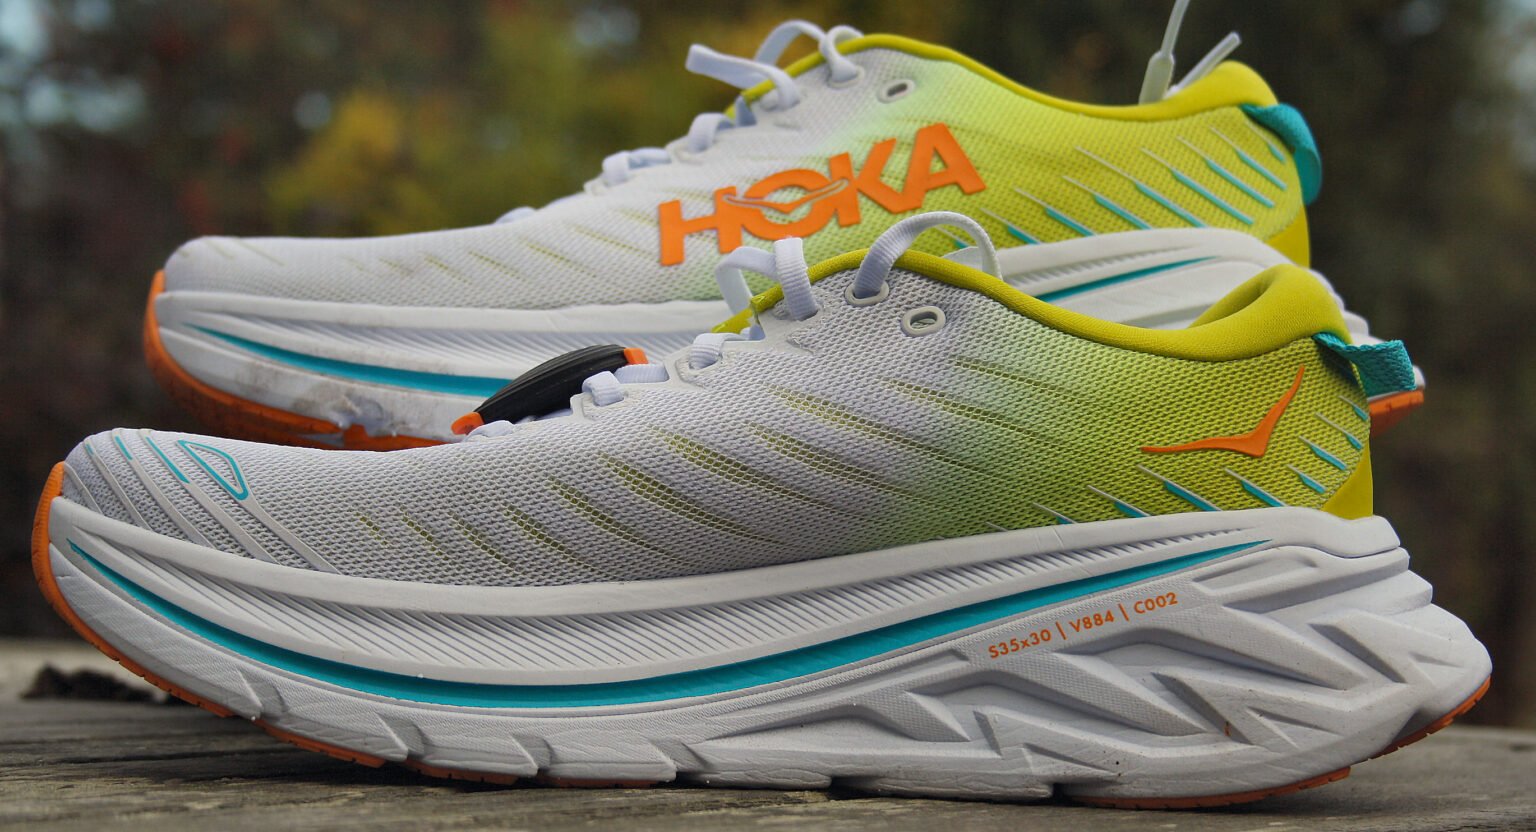 Hoka Bondi X Review - A cushioned everyday trainer for everyone